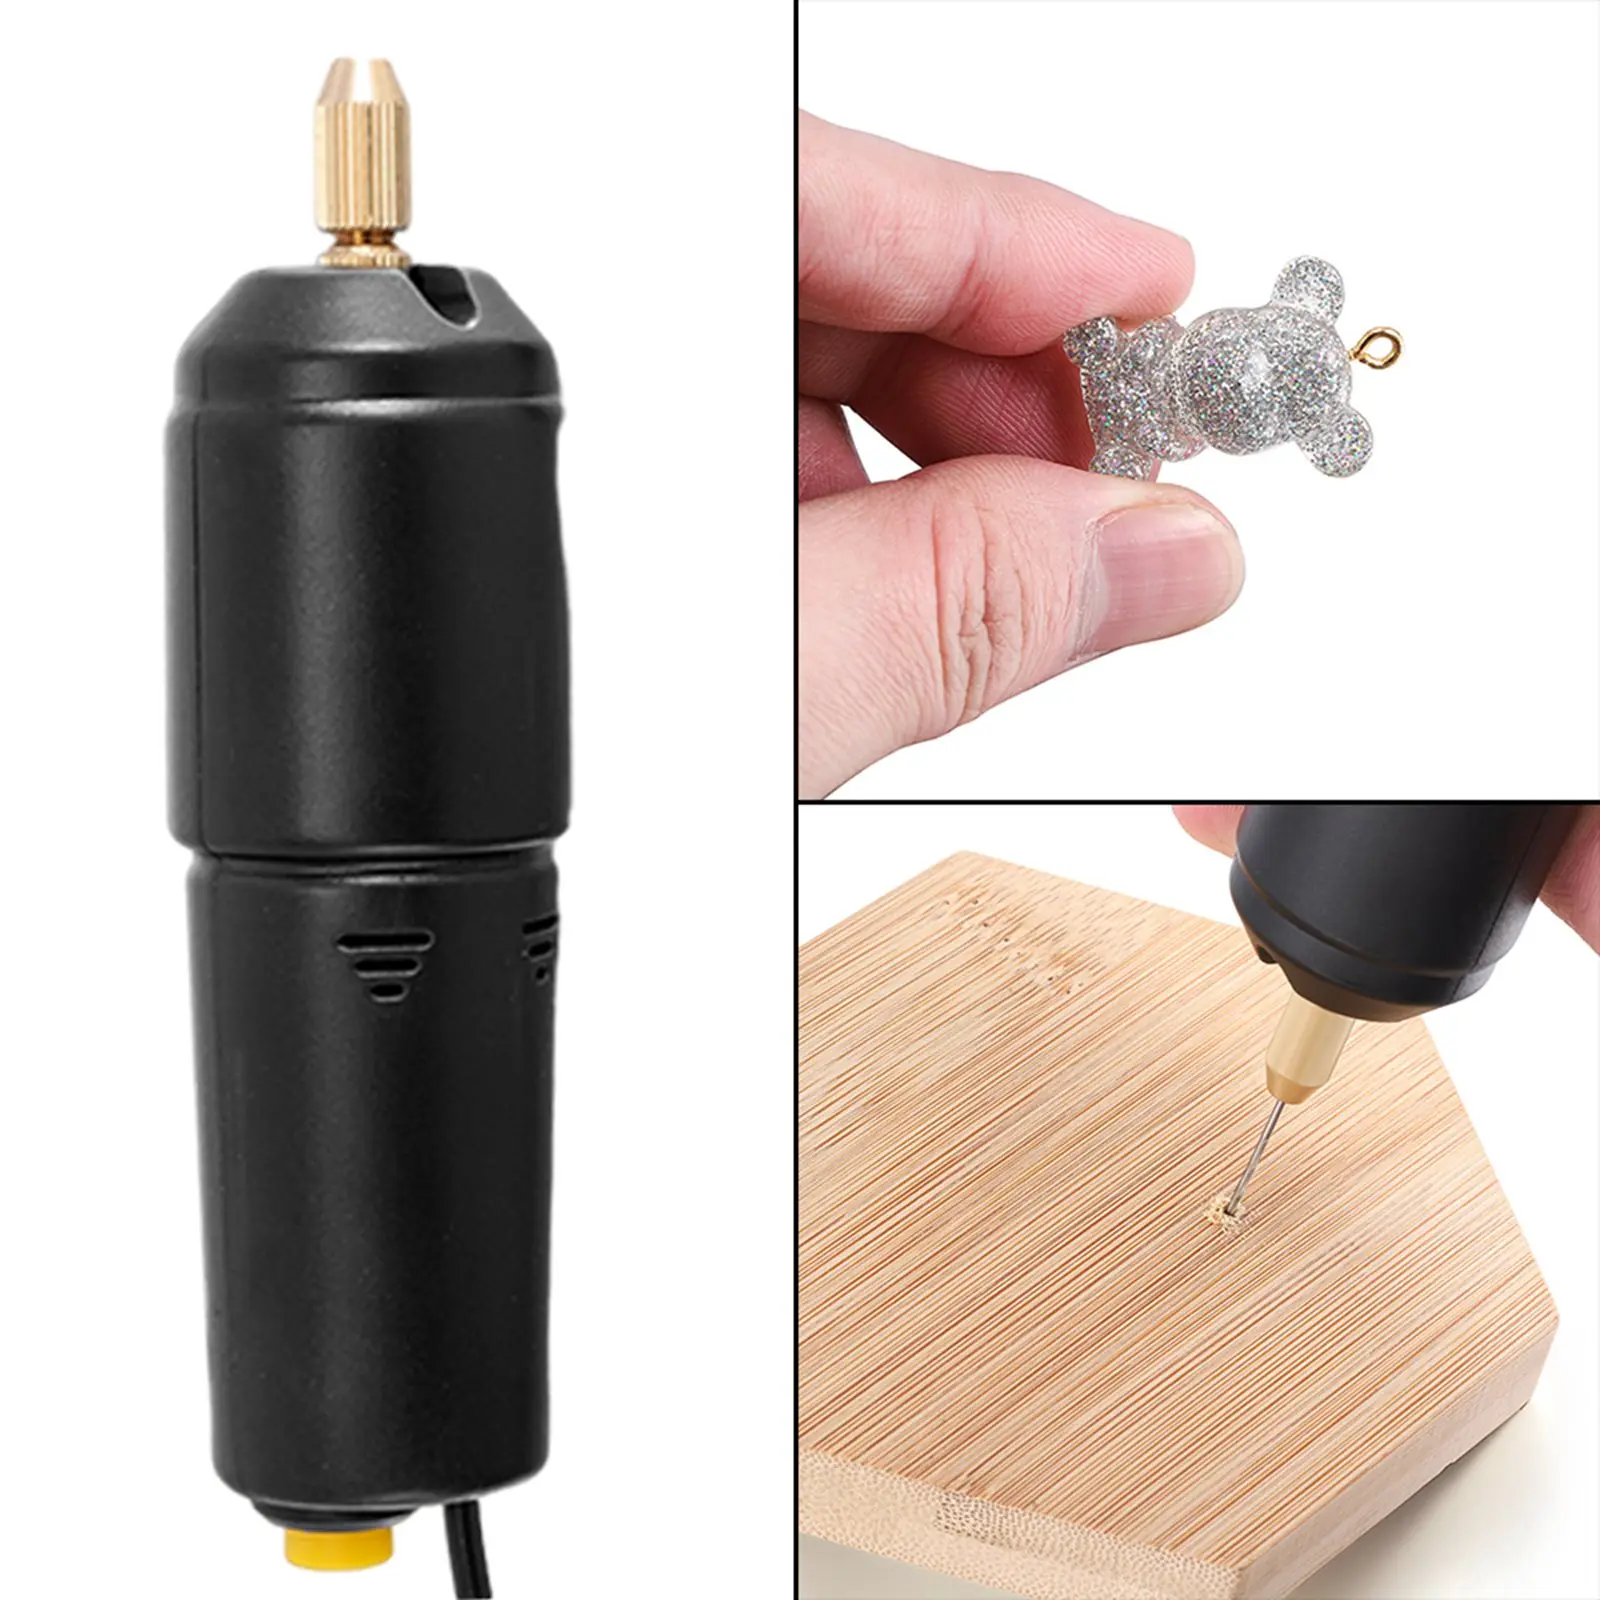 Mini Cordless Hand Drill Rotary Tool Kit Multi-Purpose for Jewelry Drilling Etching Engraving DIY Crafts